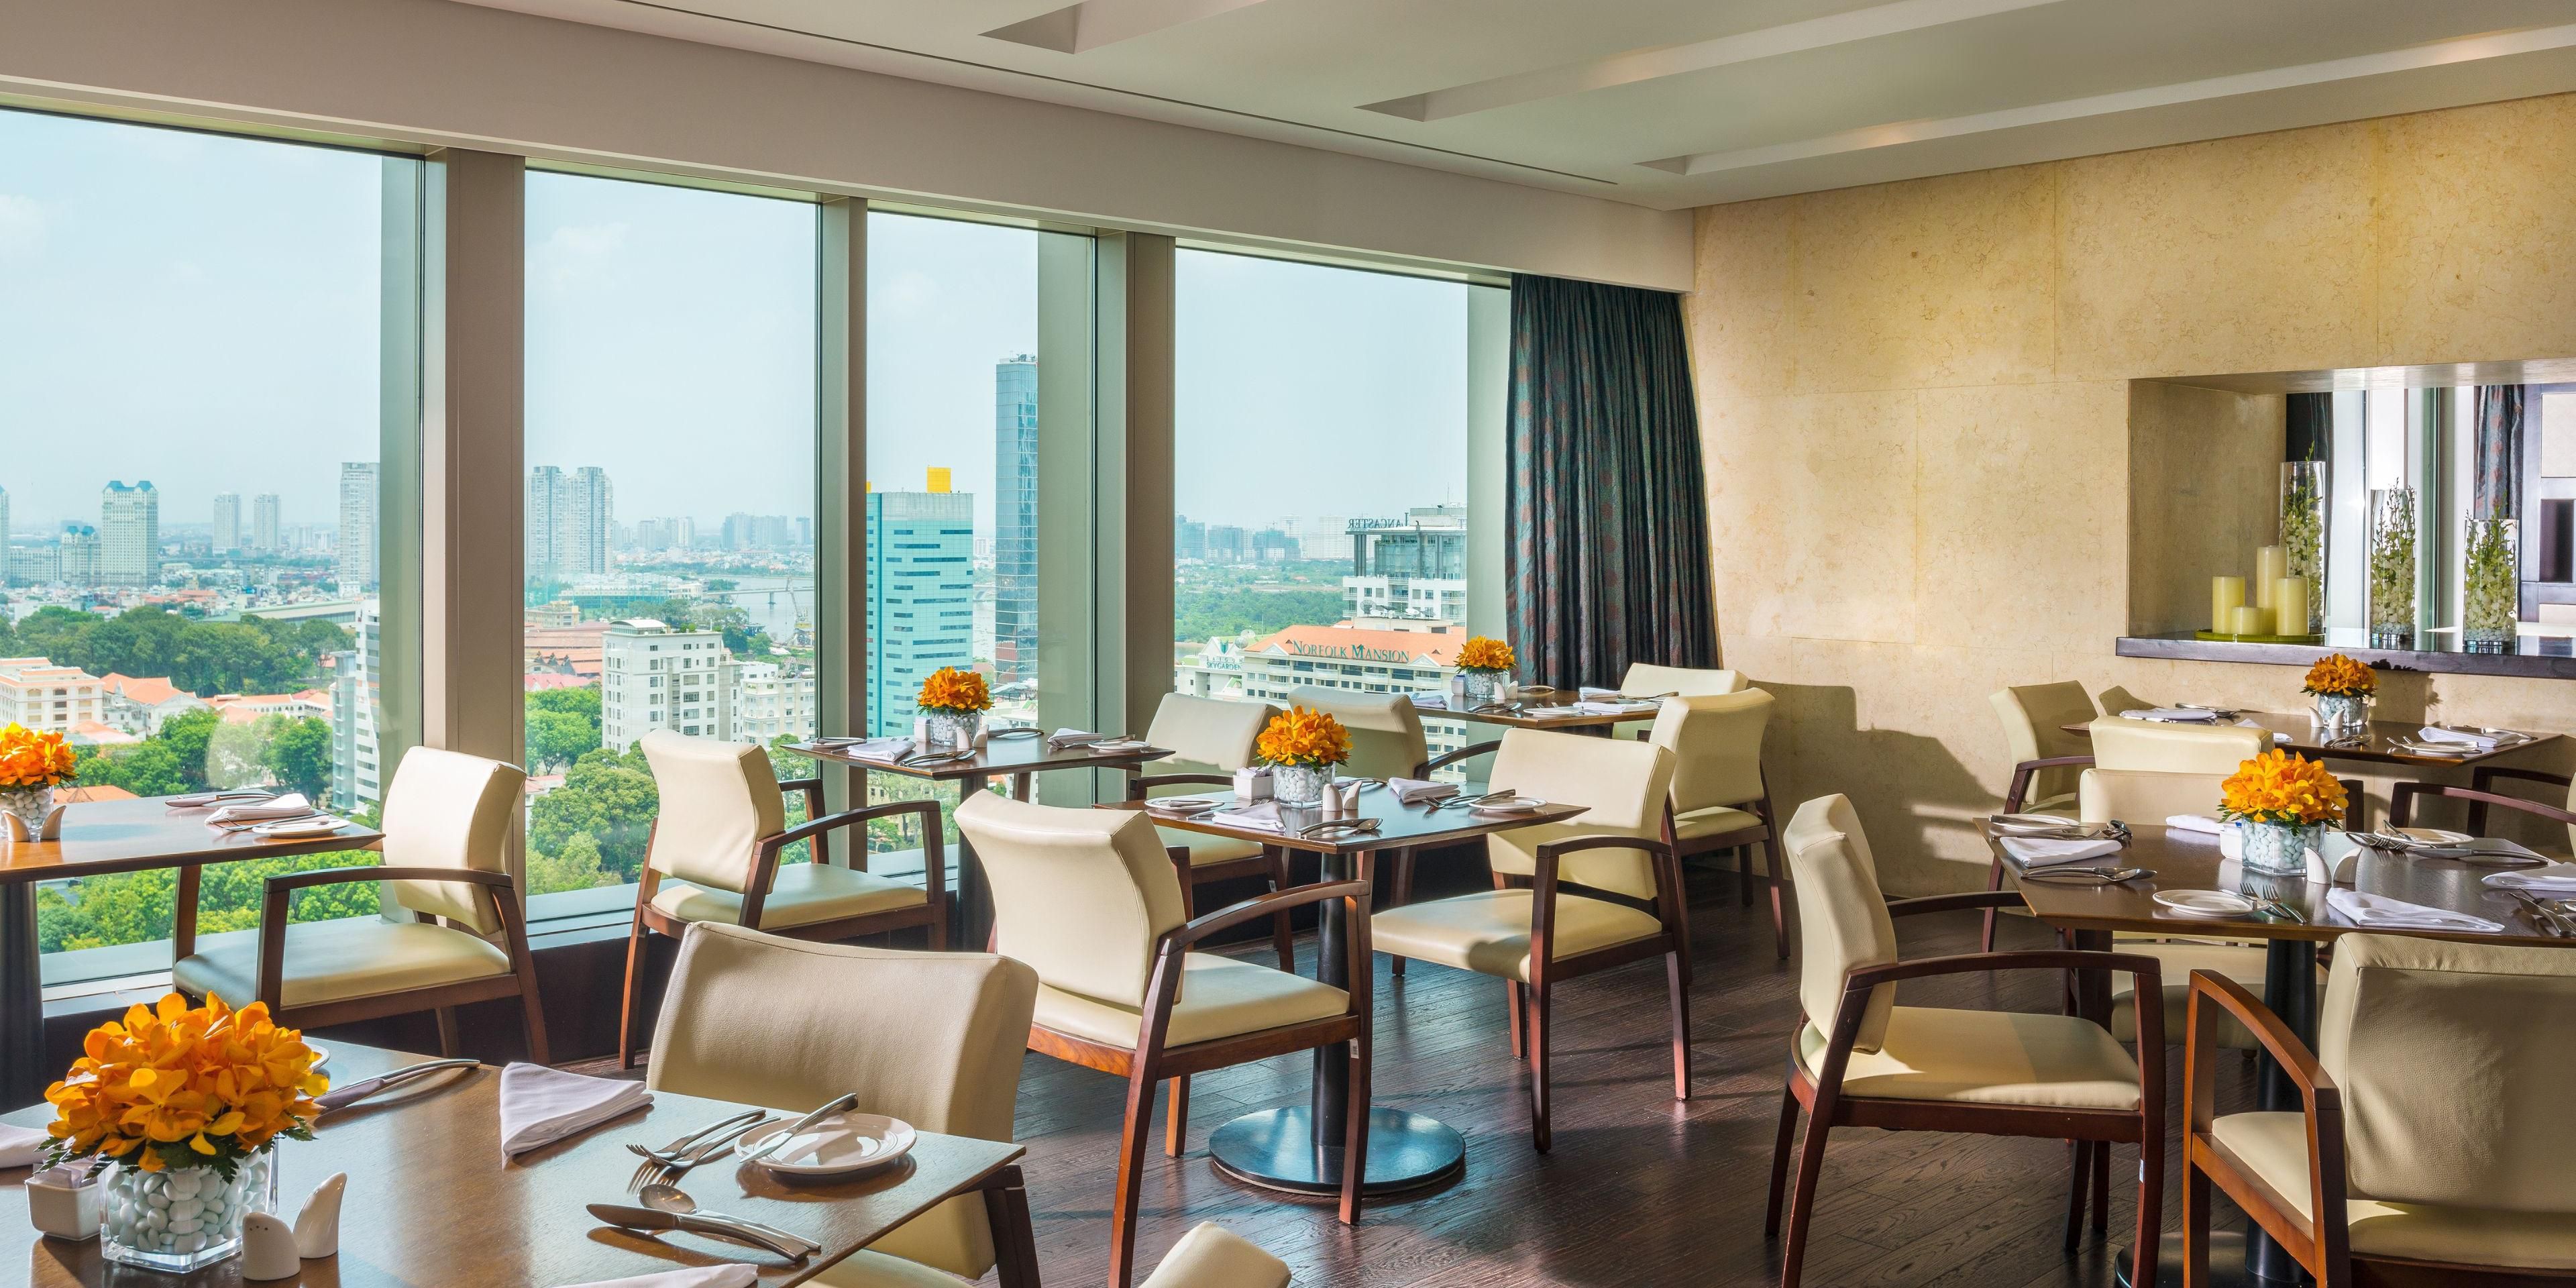 Enjoy our Club InterContinental privileges including exclusive access to our Club Lounge on the 19th floor with magnificent views over the city. Take advantage of our Club benefits and indulge yourself with breakfast, afternoon tea and a comprehensive selection of evening canapés and cocktails.